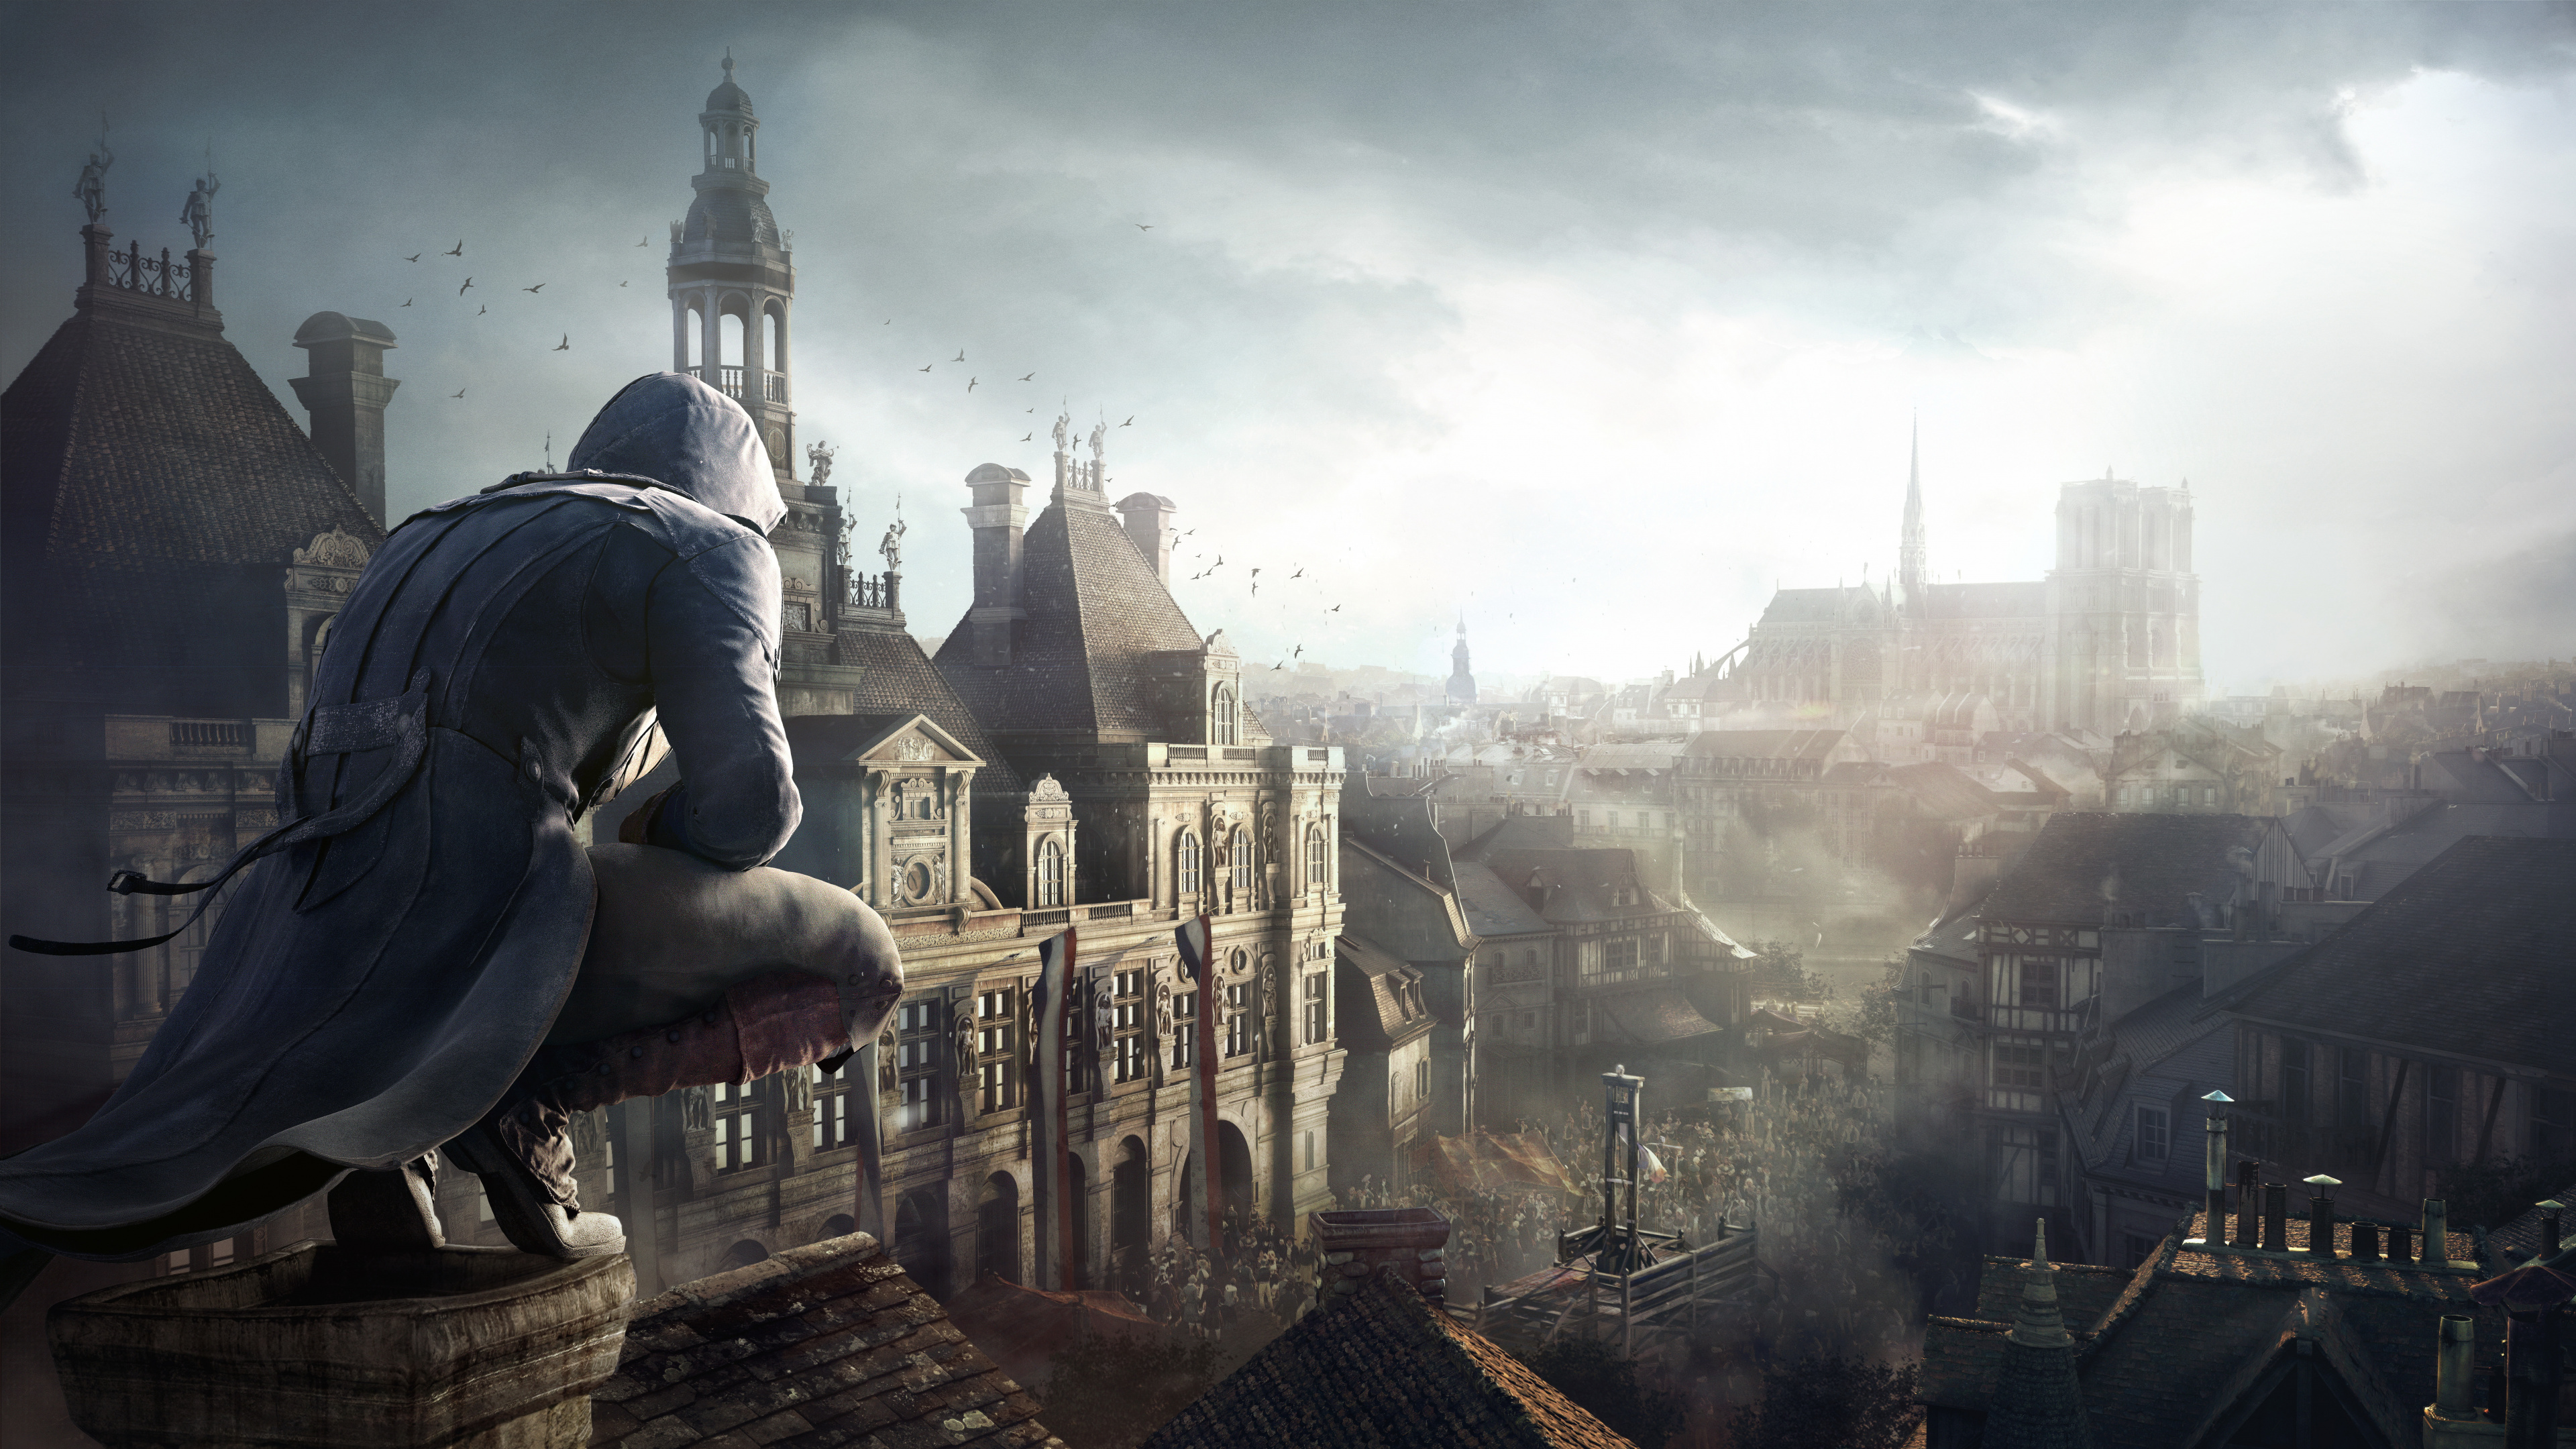 Assassins Creed Unity, Assassins Creed, Ubisoft, Arno Dorian, Obscurité. Wallpaper in 3840x2160 Resolution